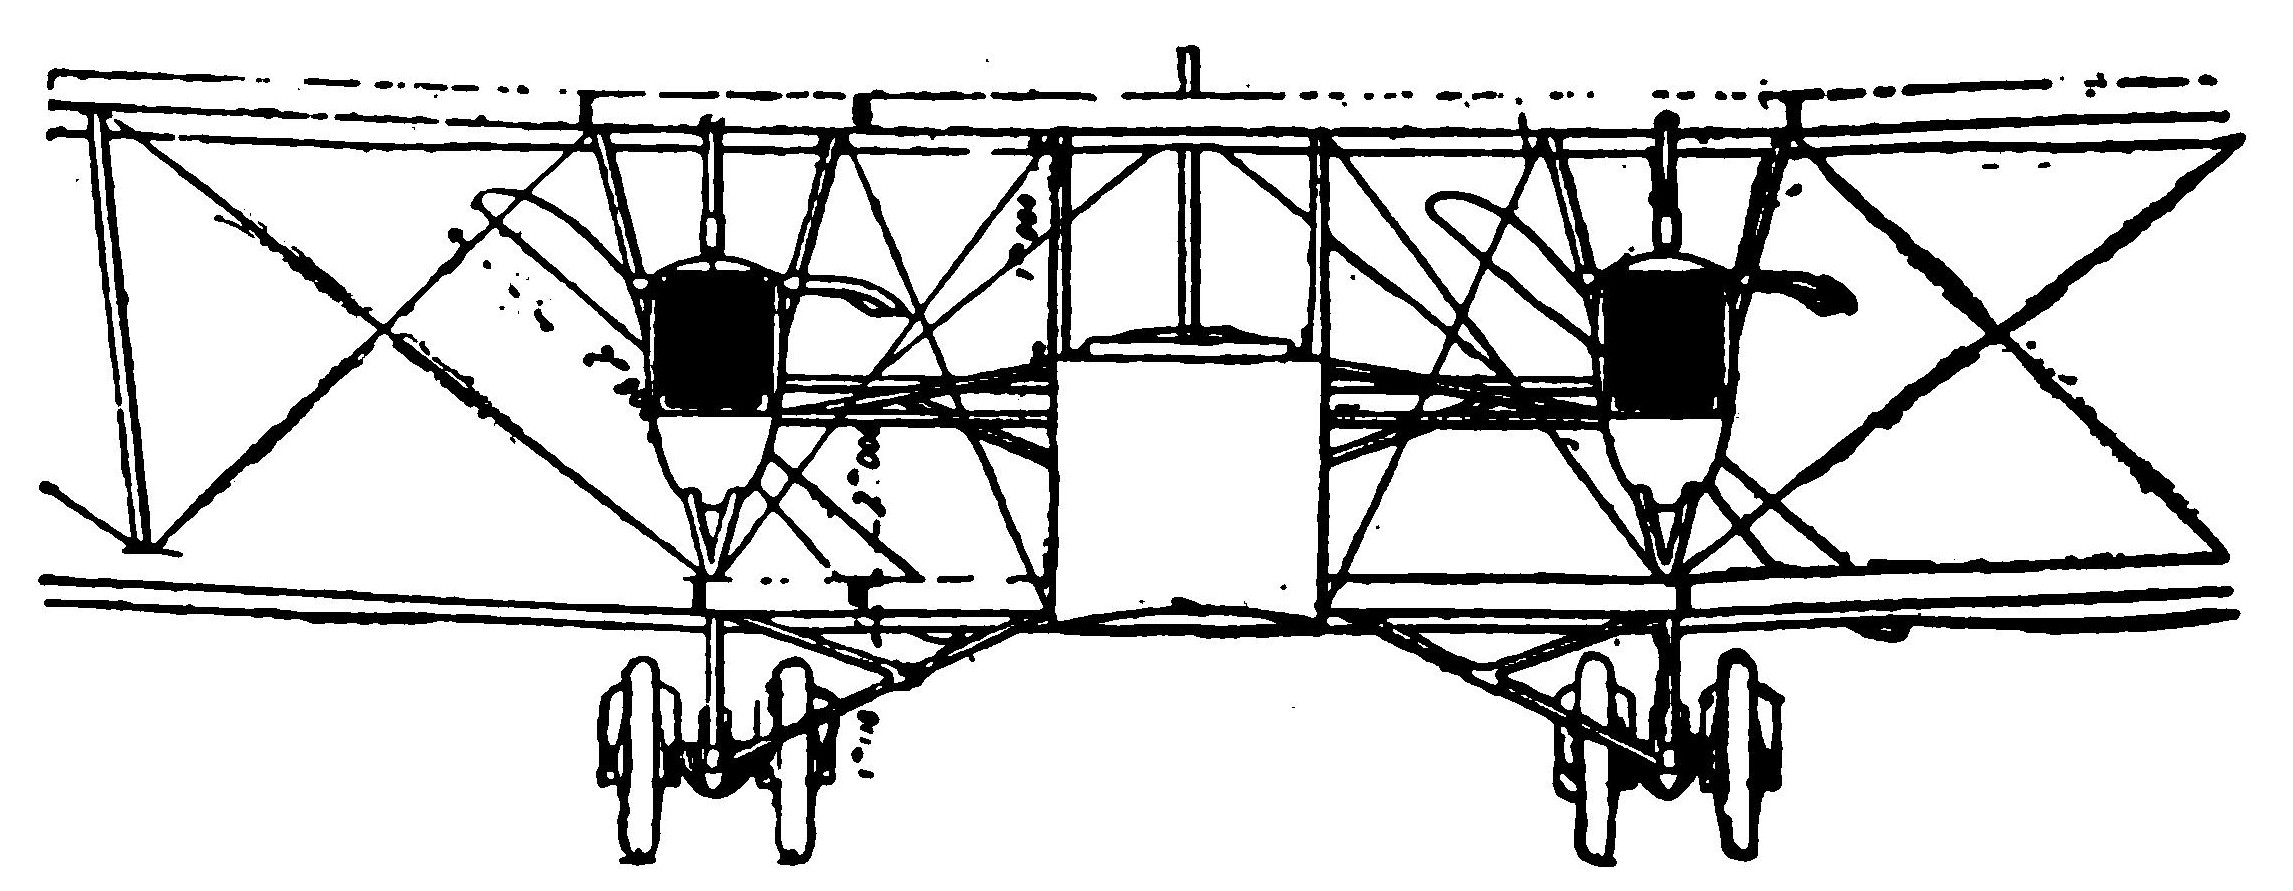 Fig. 14. Chassis for Twin Motored Biplane of Bombing Type.